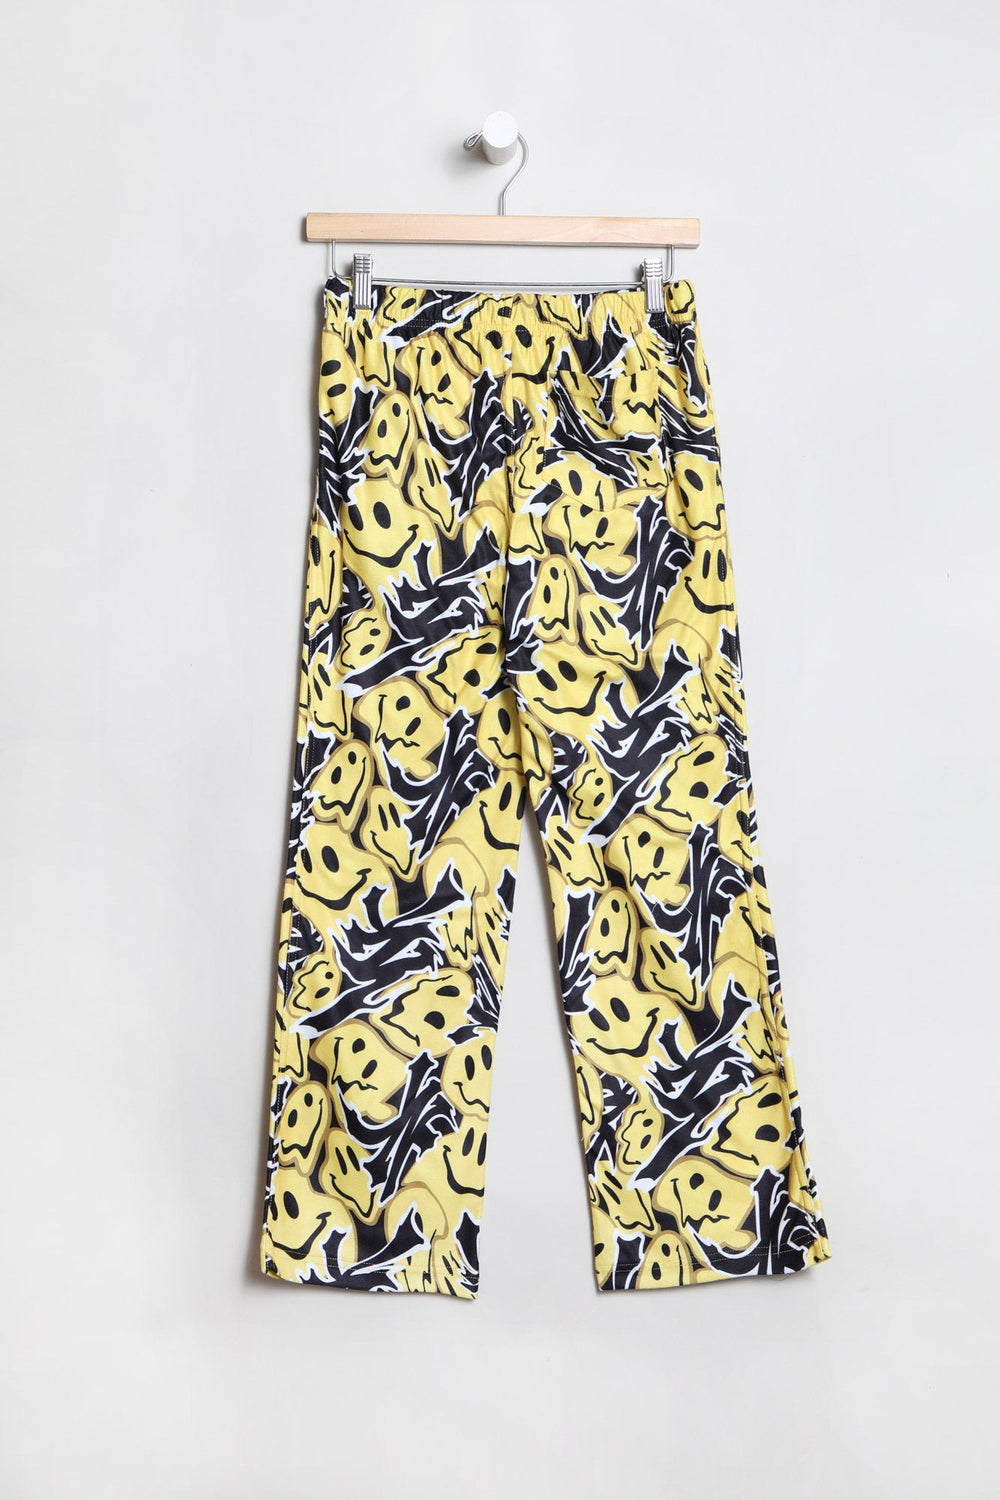 Zoo York Youth Melted Smiley Pajama Bottoms Yellow